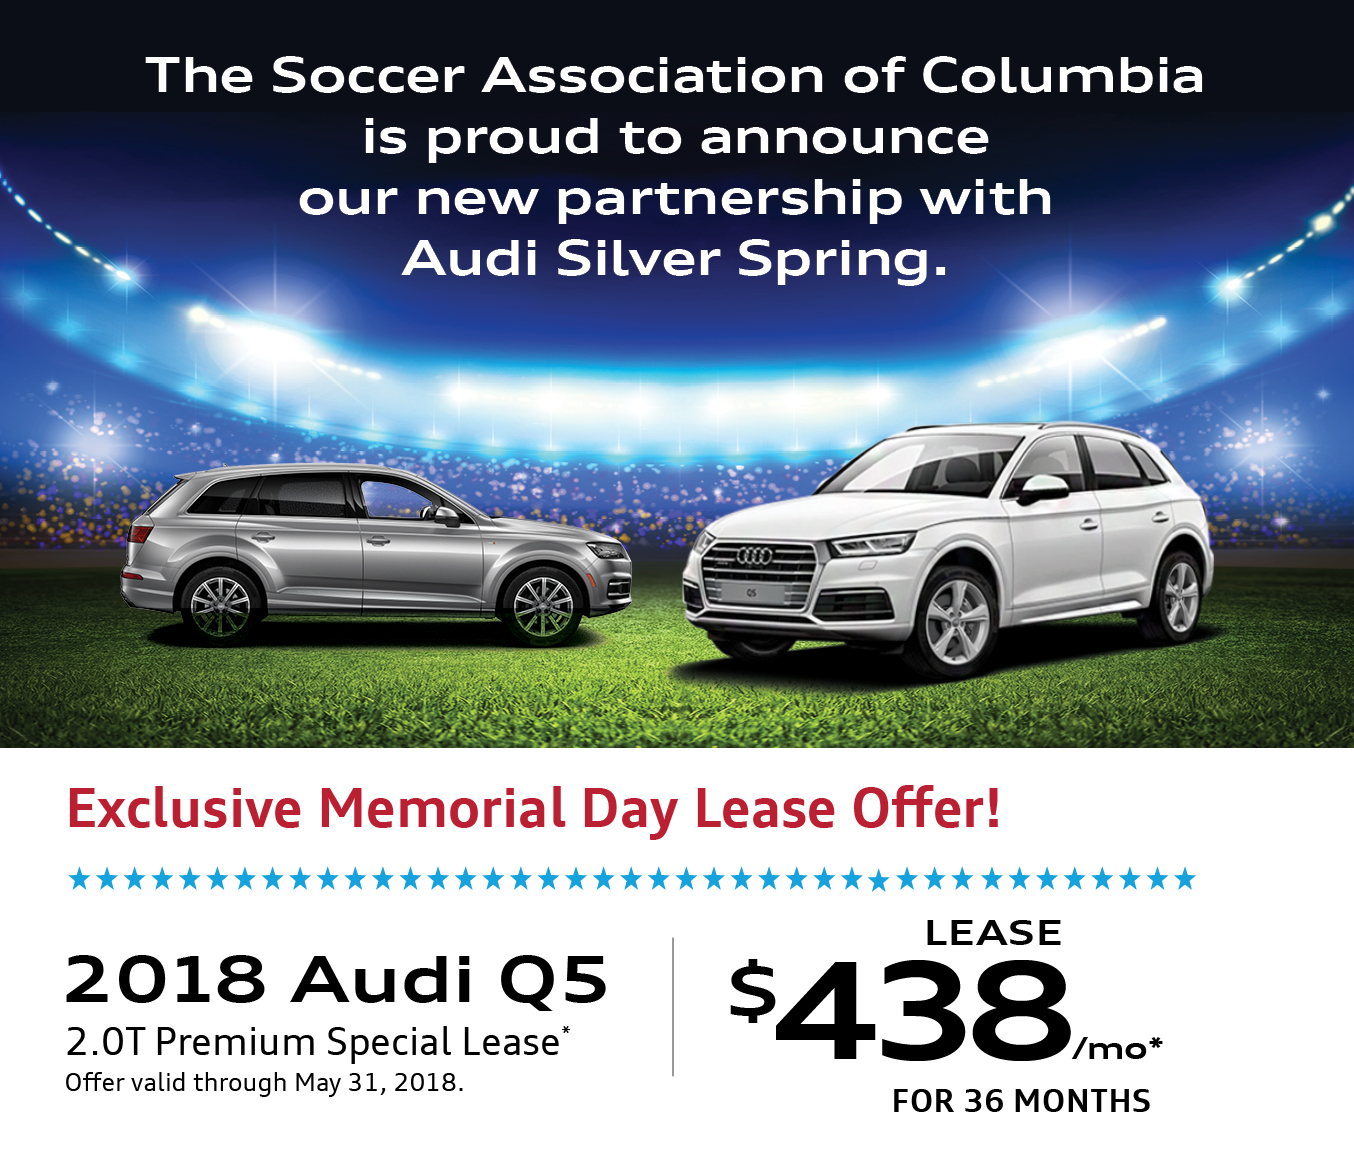 Exclusive Memorial Day Lease Offer!